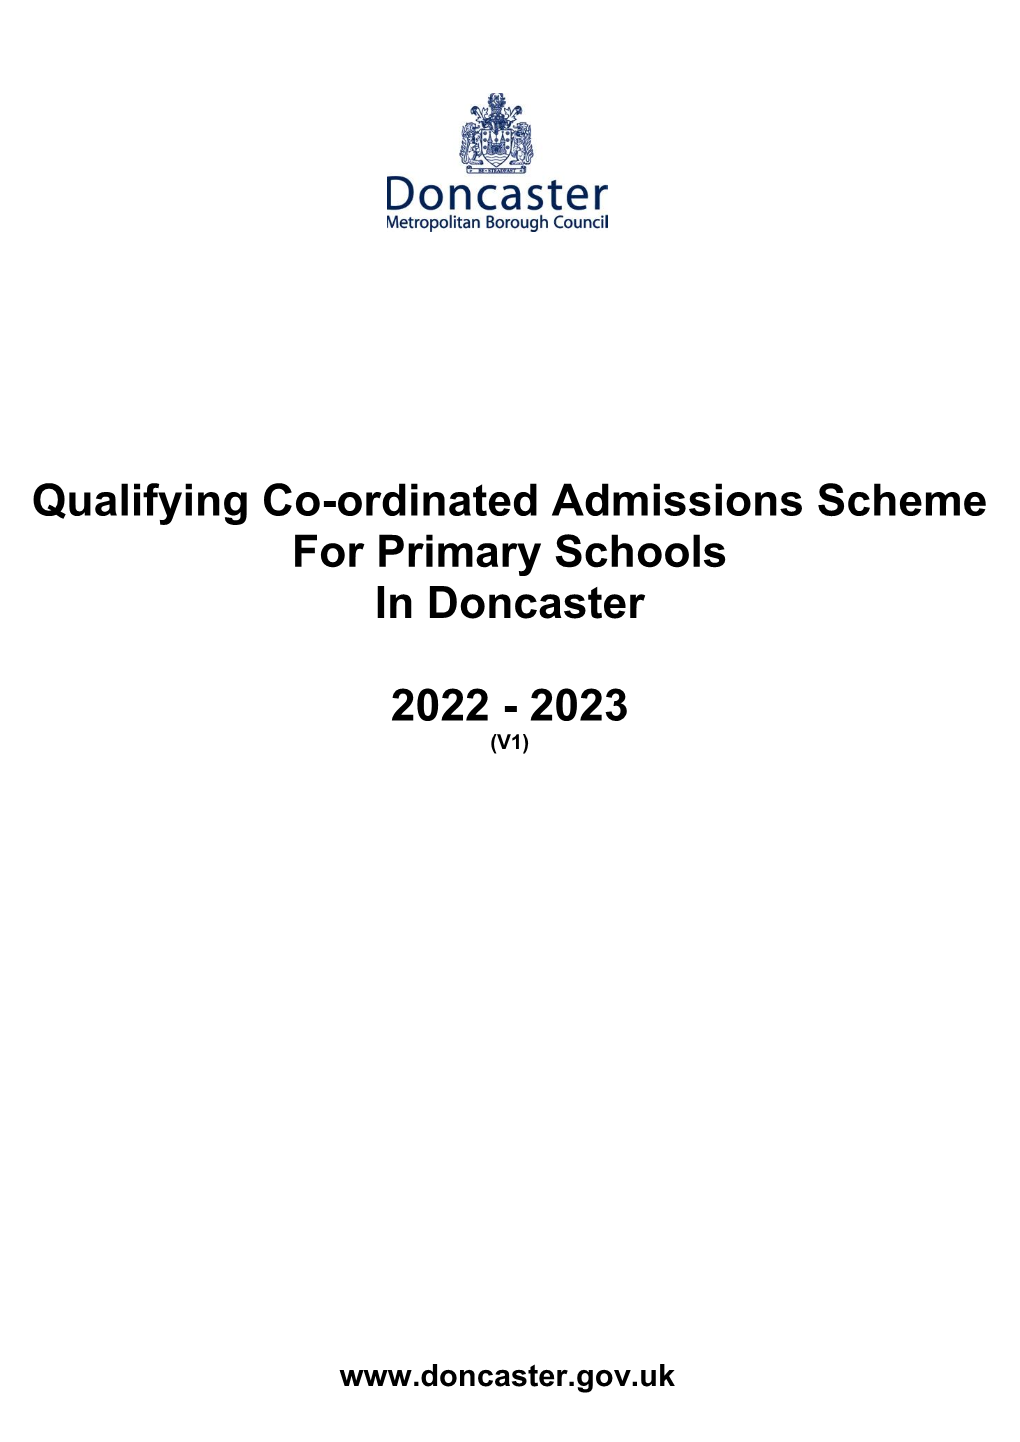 Qualifying Co-Ordinated Admissions Scheme for Primary Schools in Doncaster